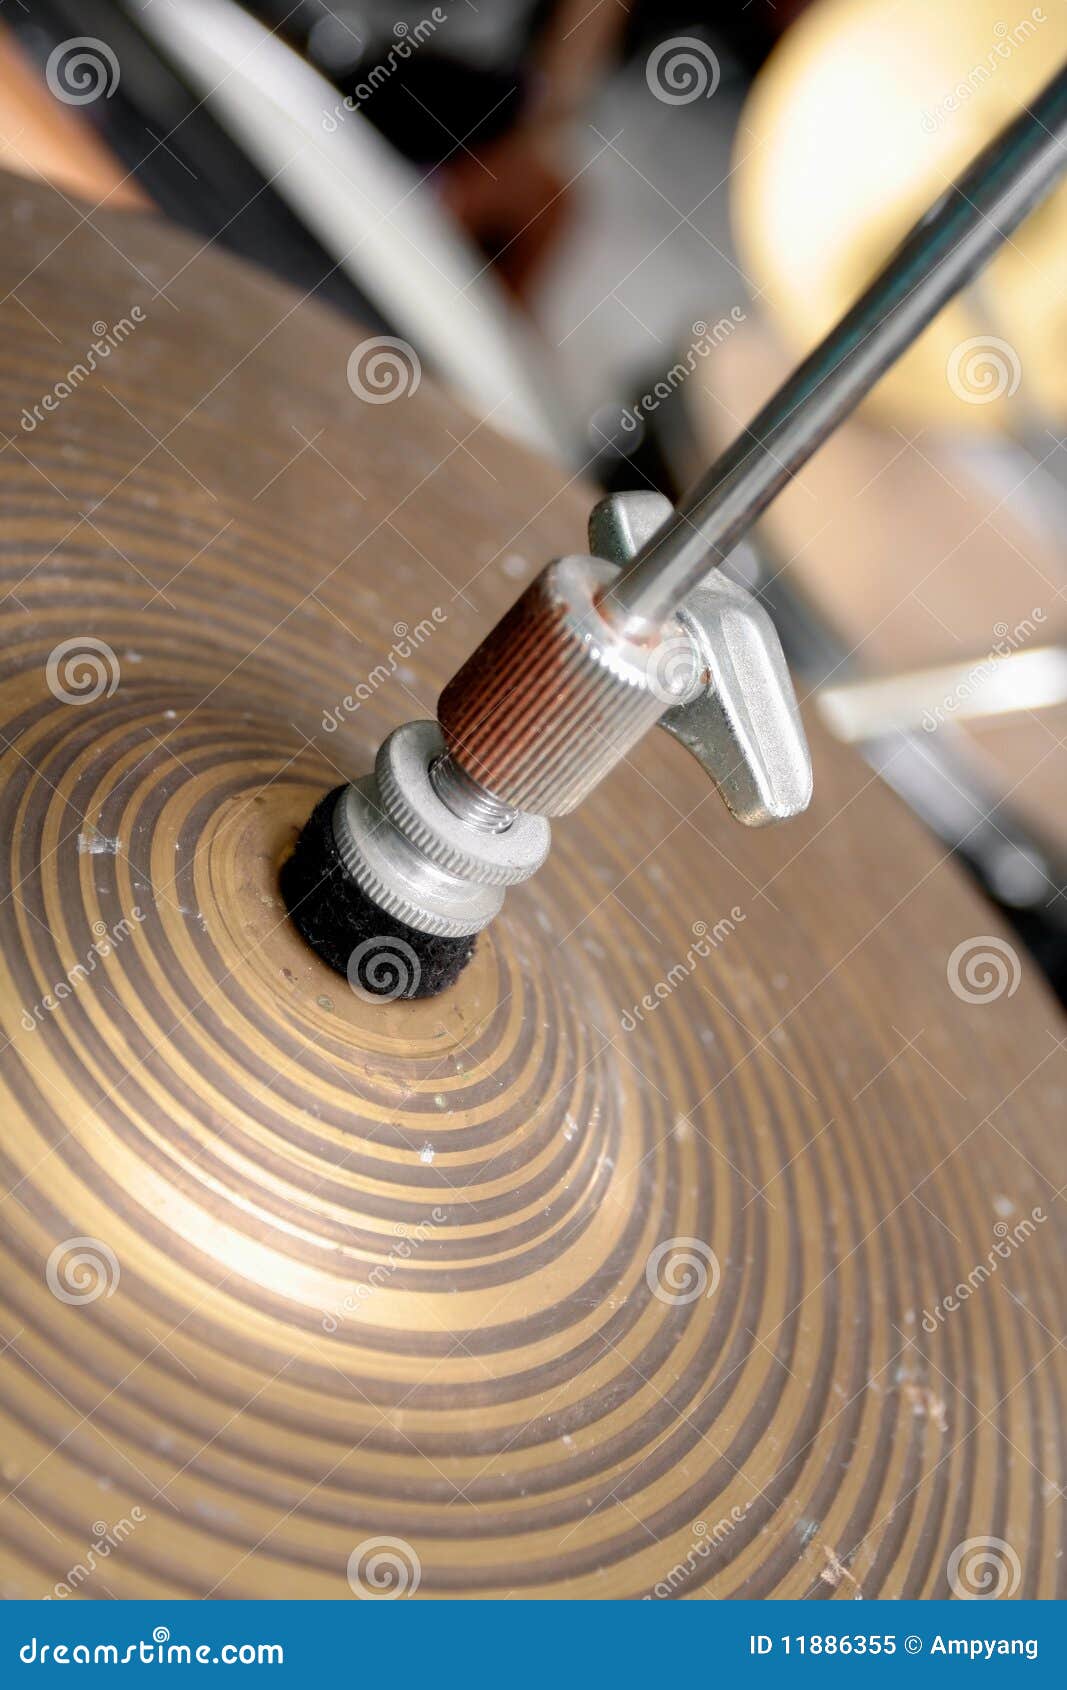 cymbal of a drum set